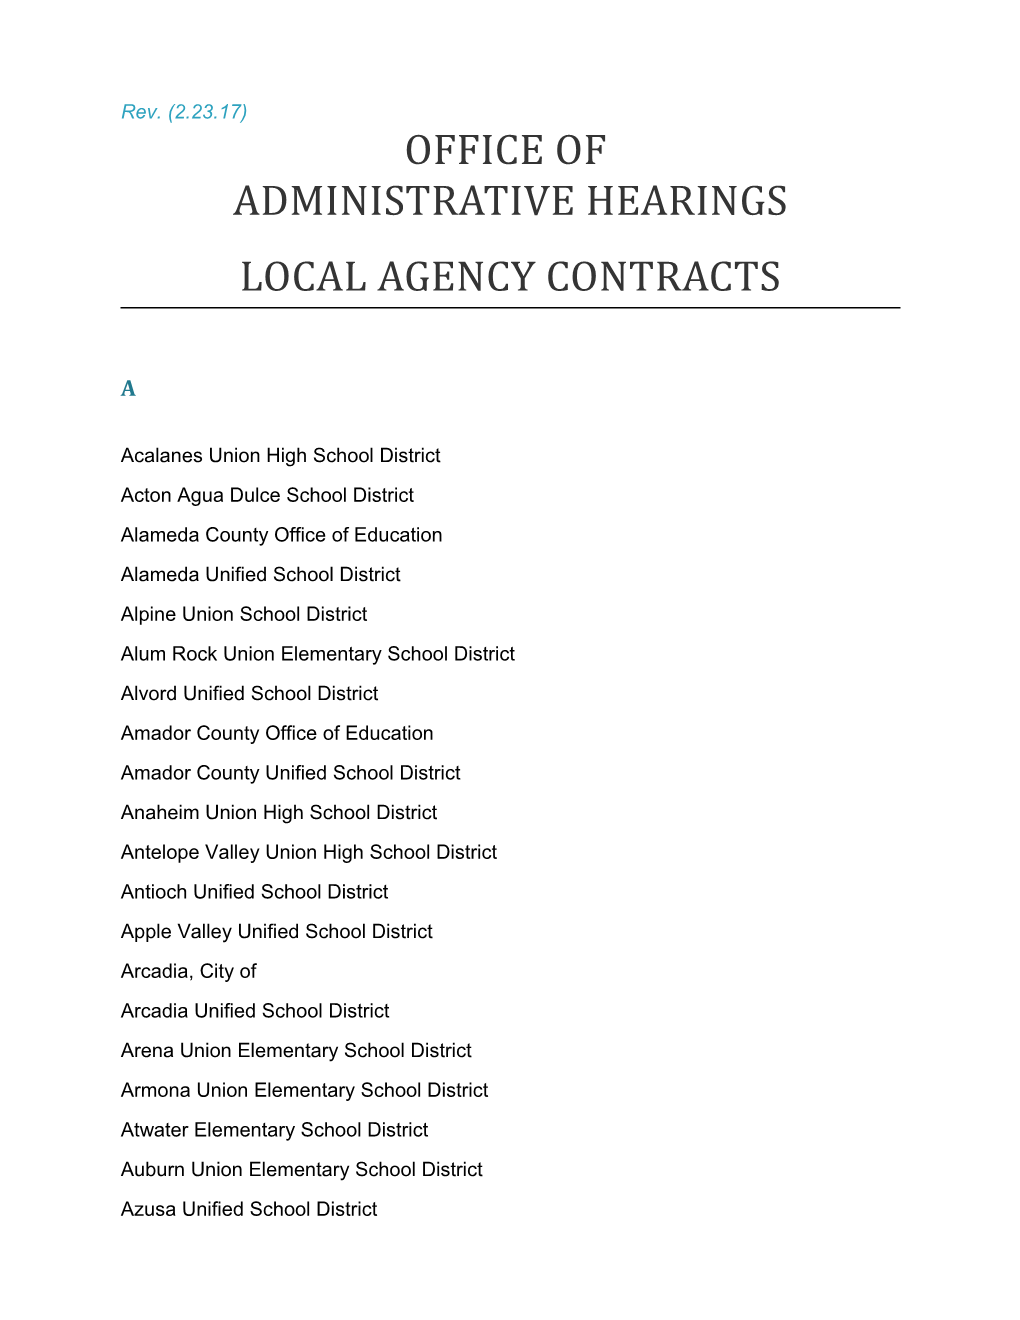 Office of Administrative Hearings